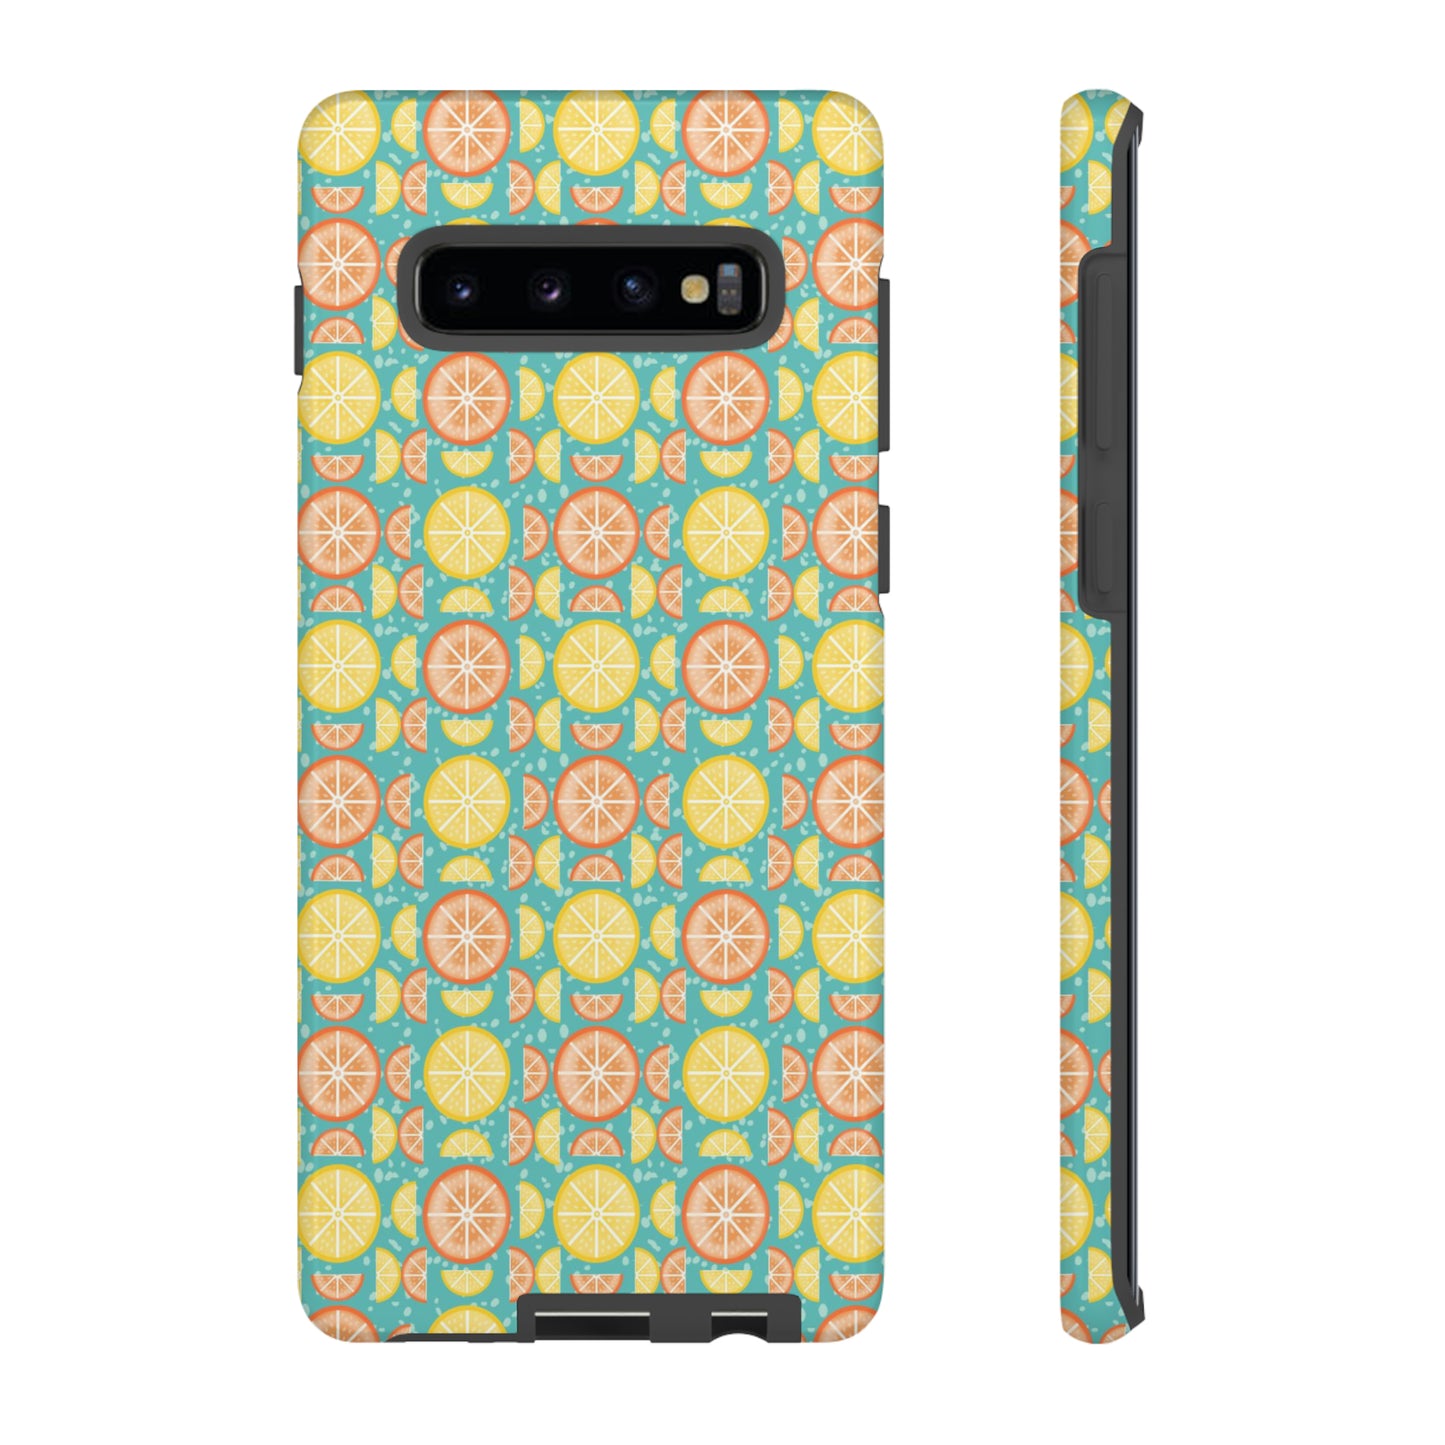 Citrus Slices Tough Phone Case - Protect Your Device with Style